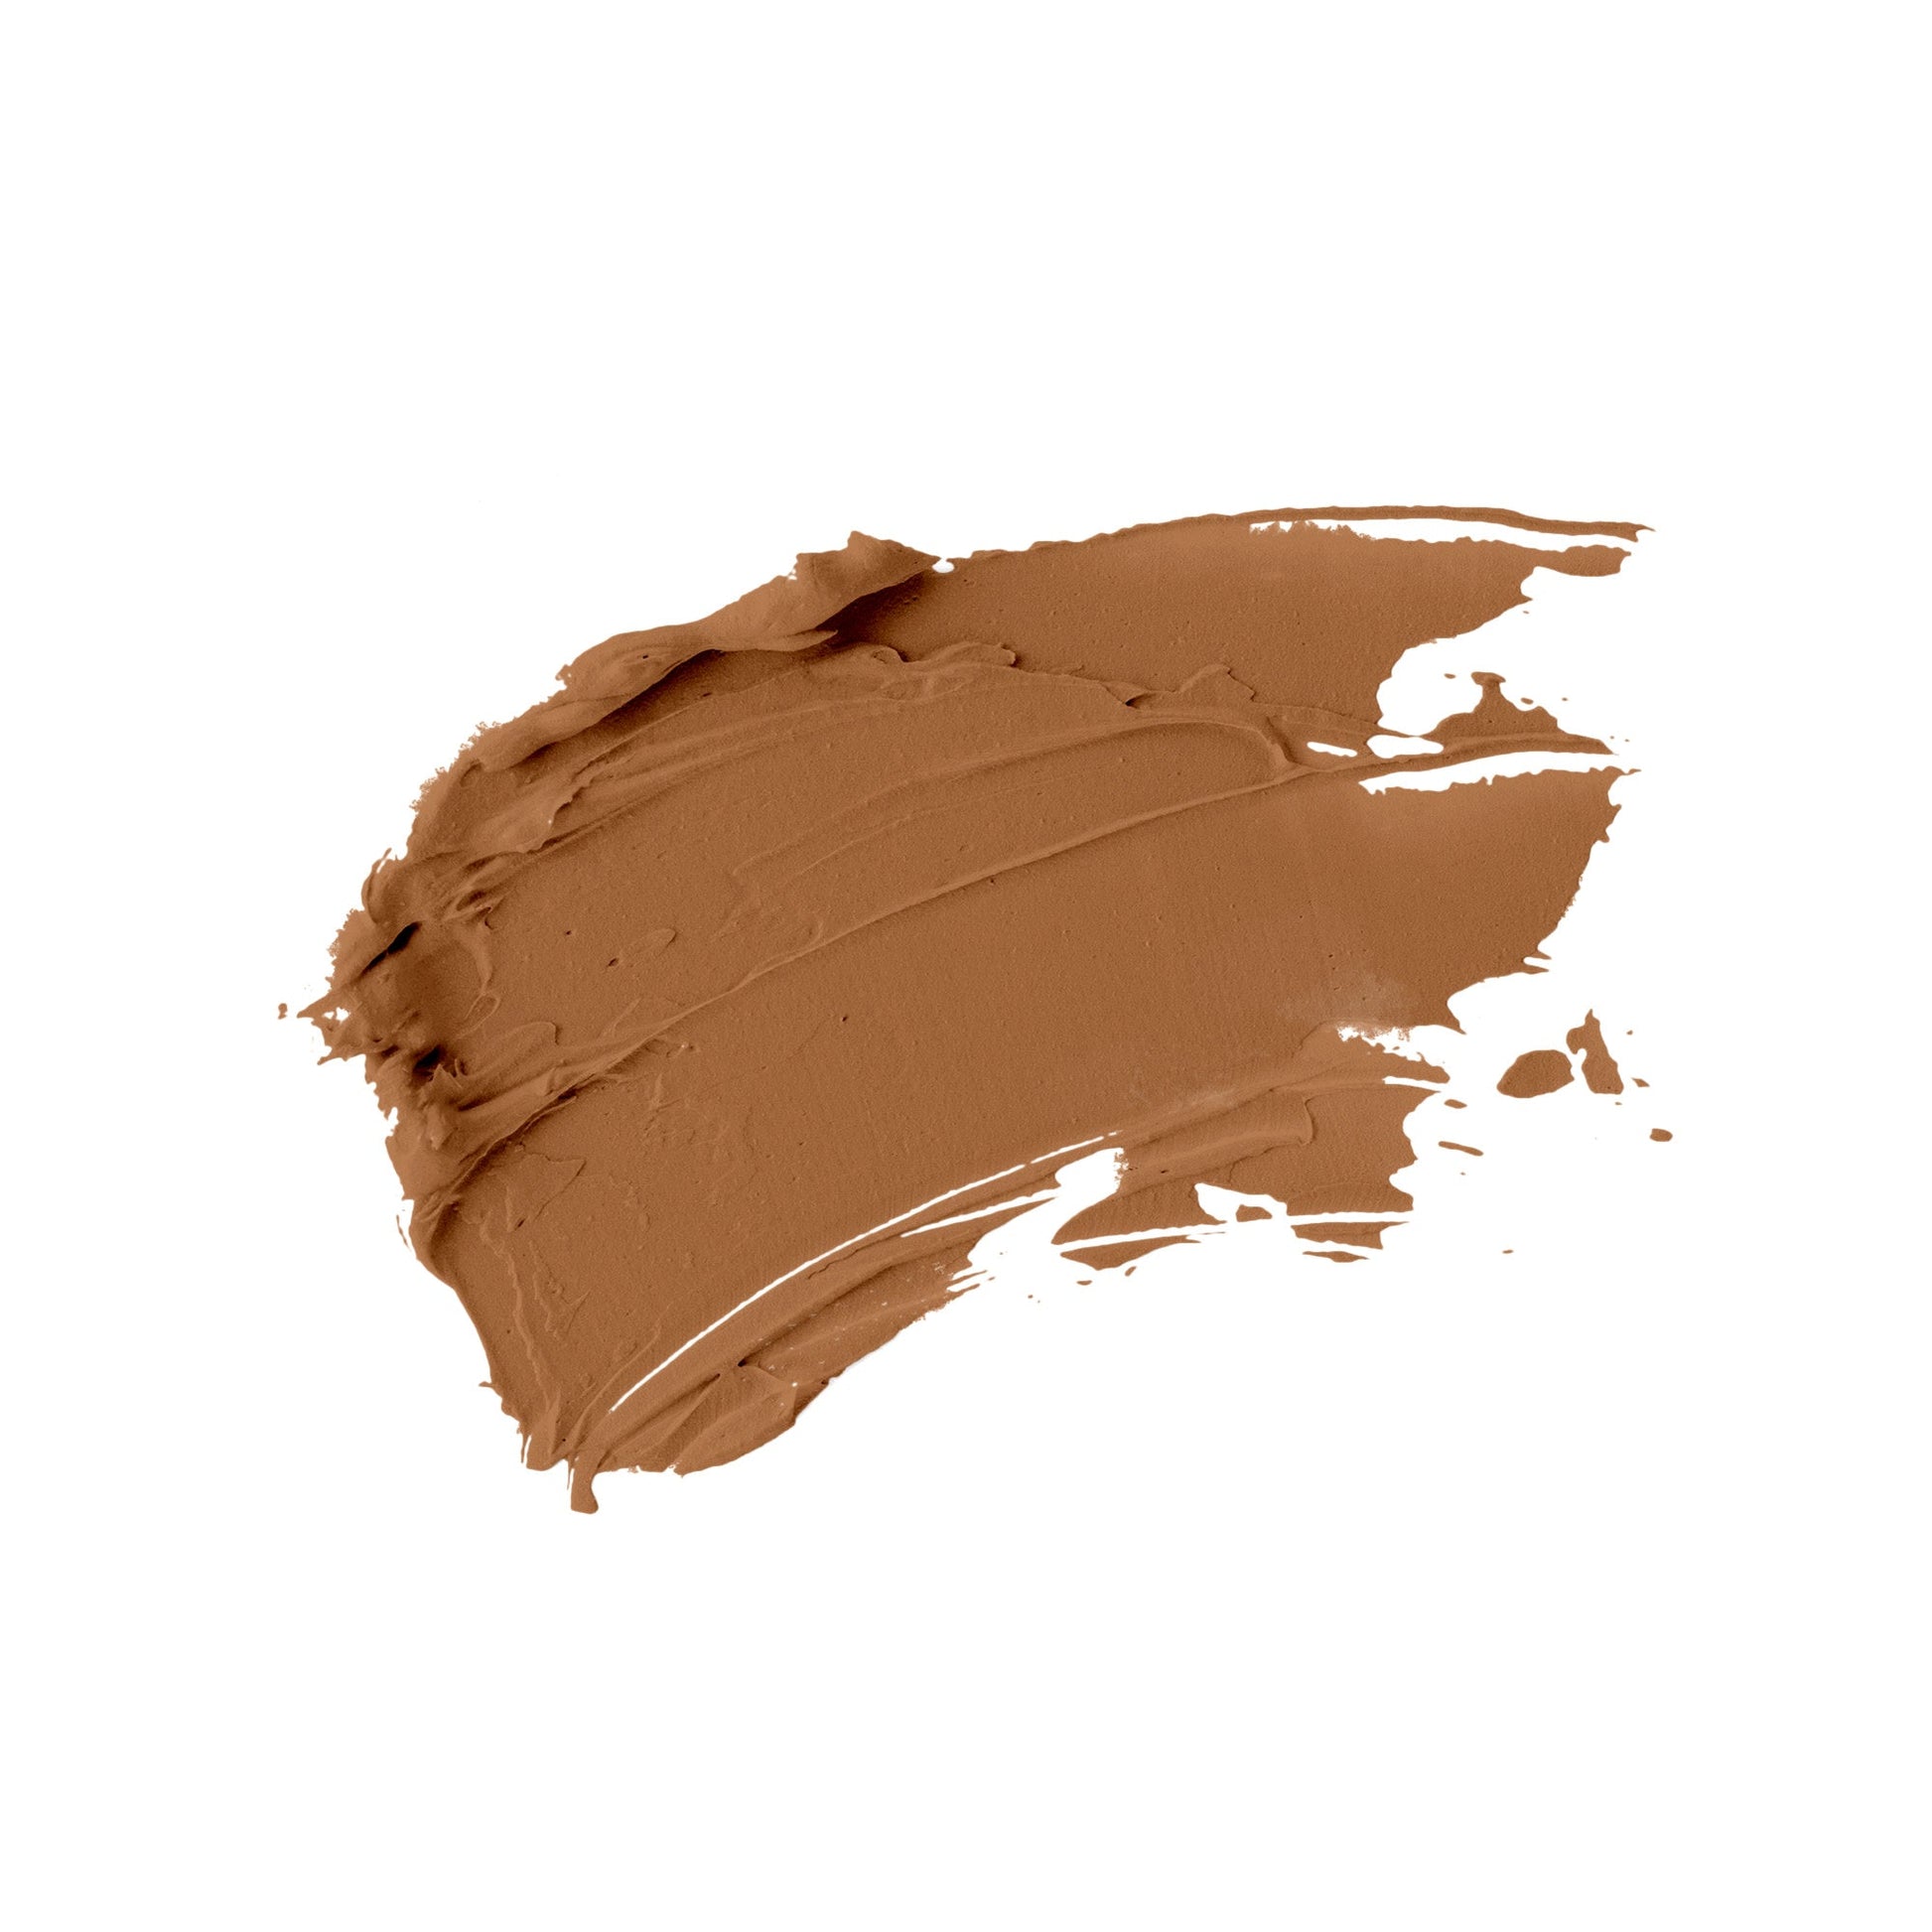 Swatch of medium tan tone of an oil free natural non-toxic liquid foundation